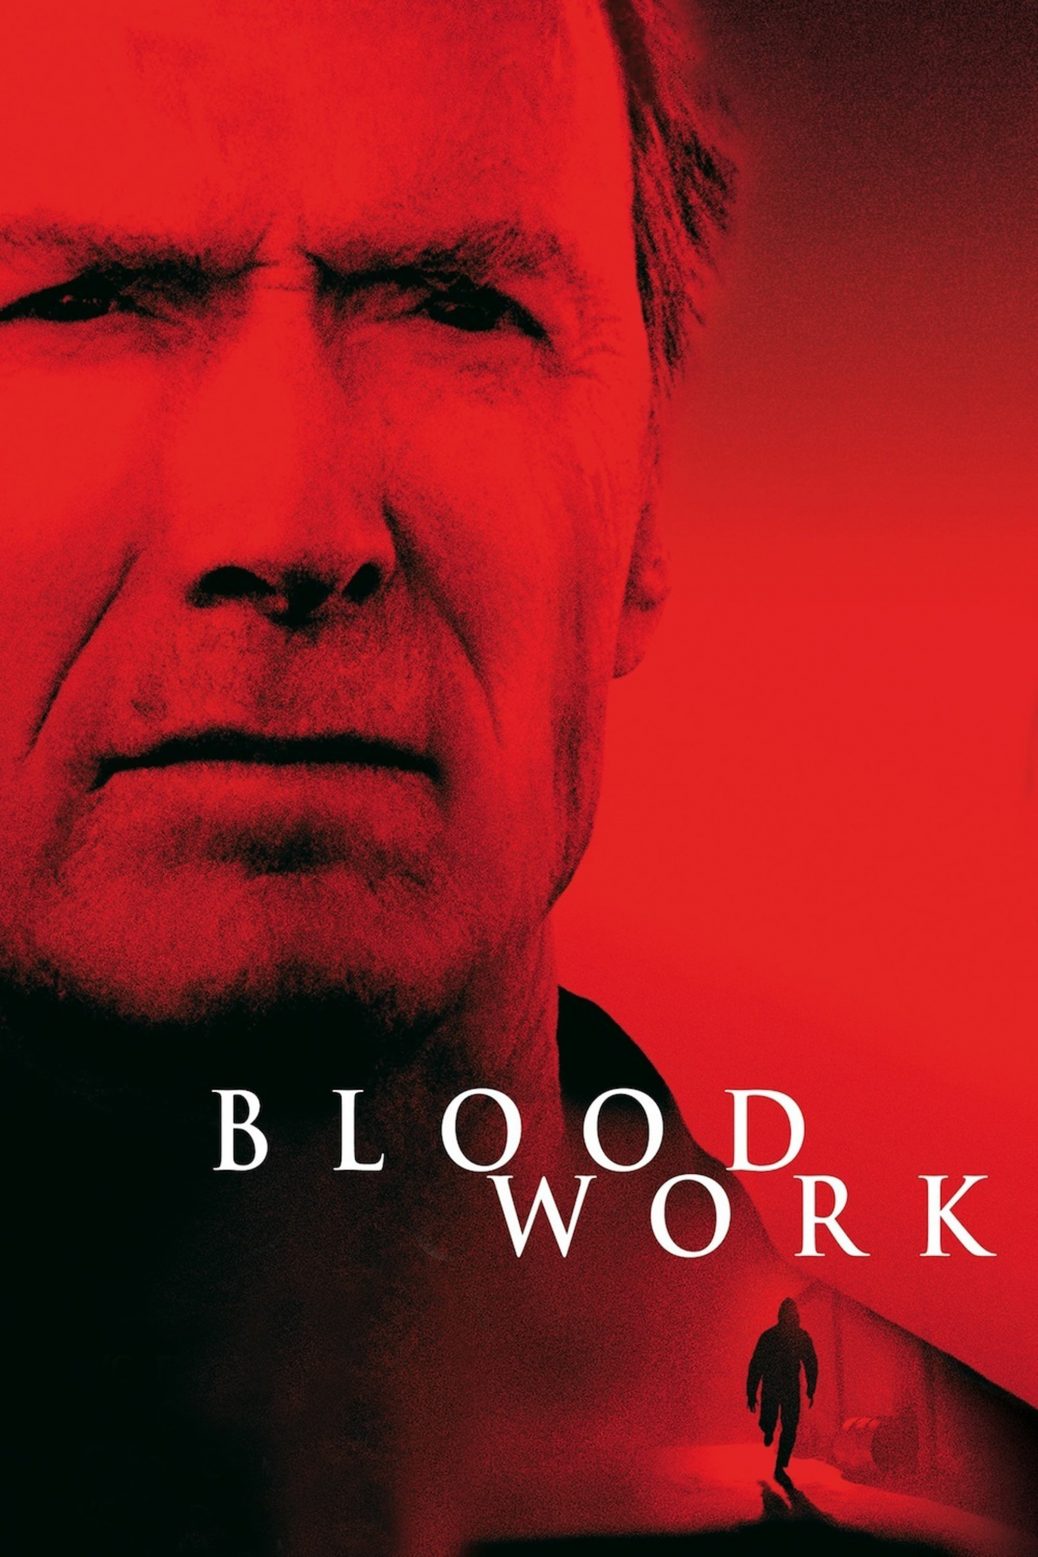 Poster for the movie "Blood Work"